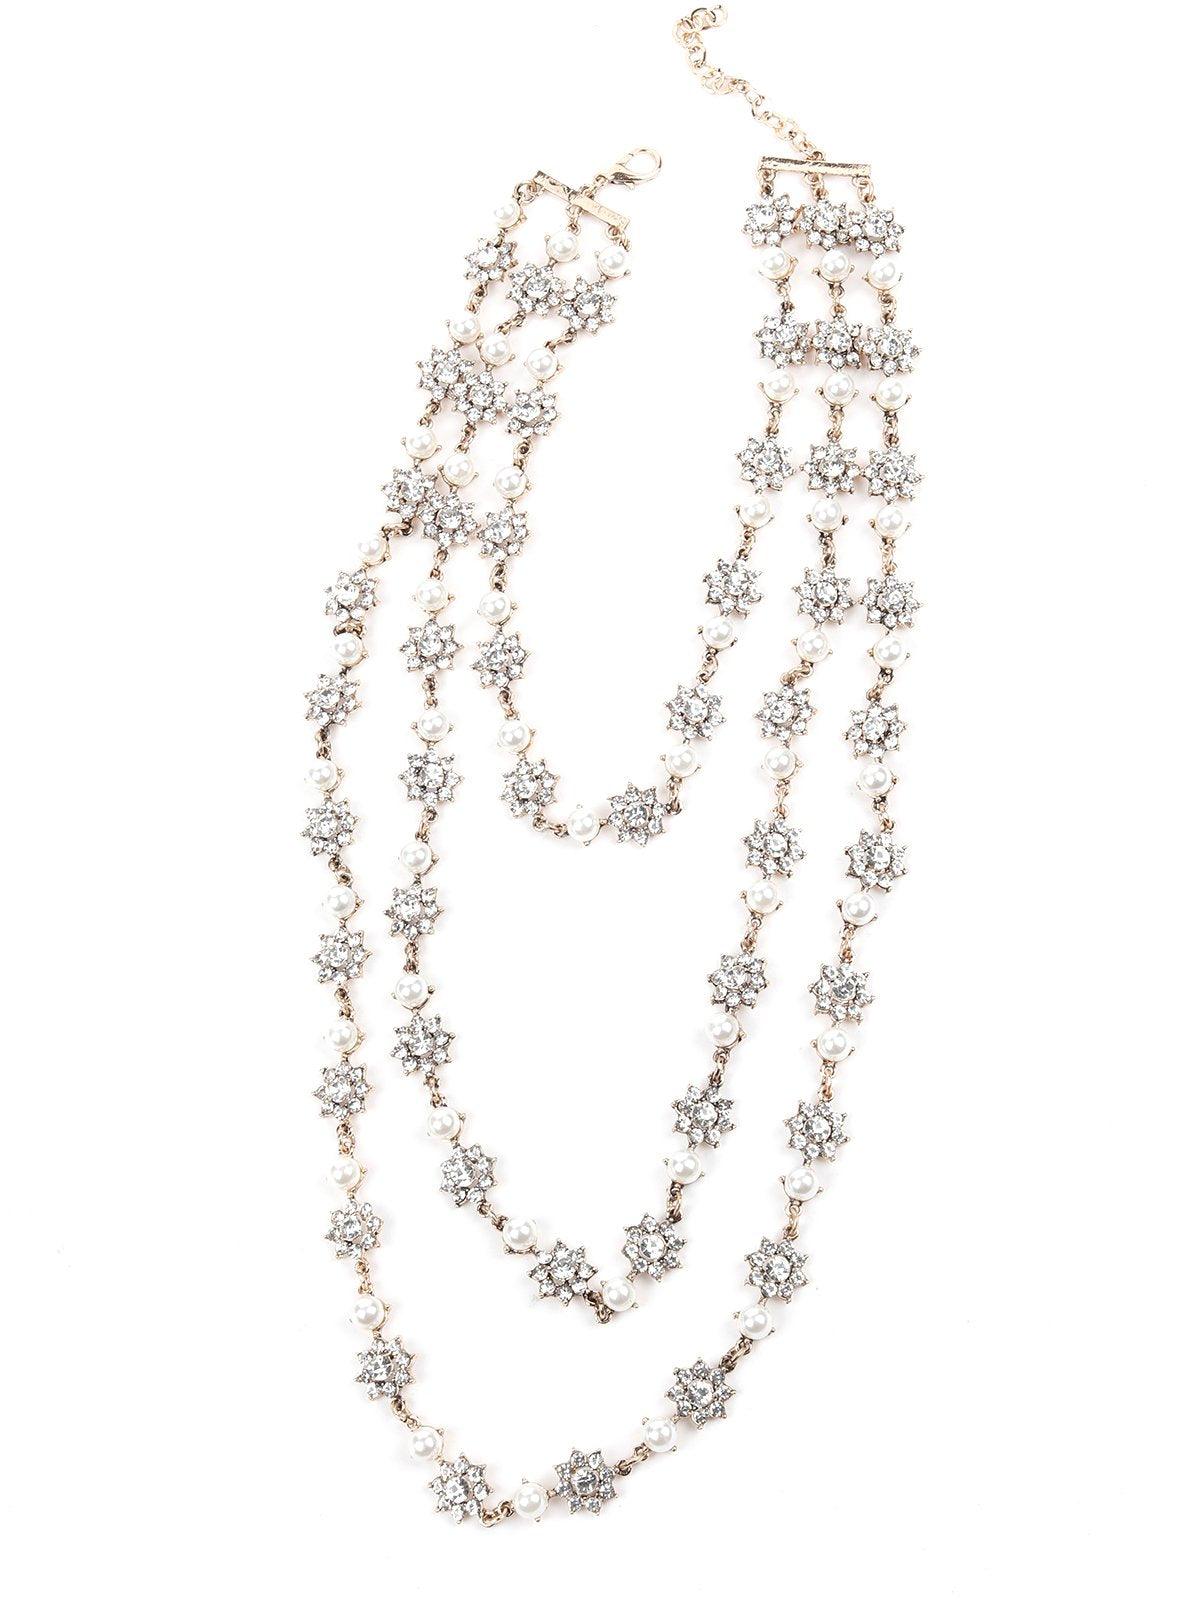 Women's Exquisite Designer 3 Layered Necklace With Pearls. - White - Odette